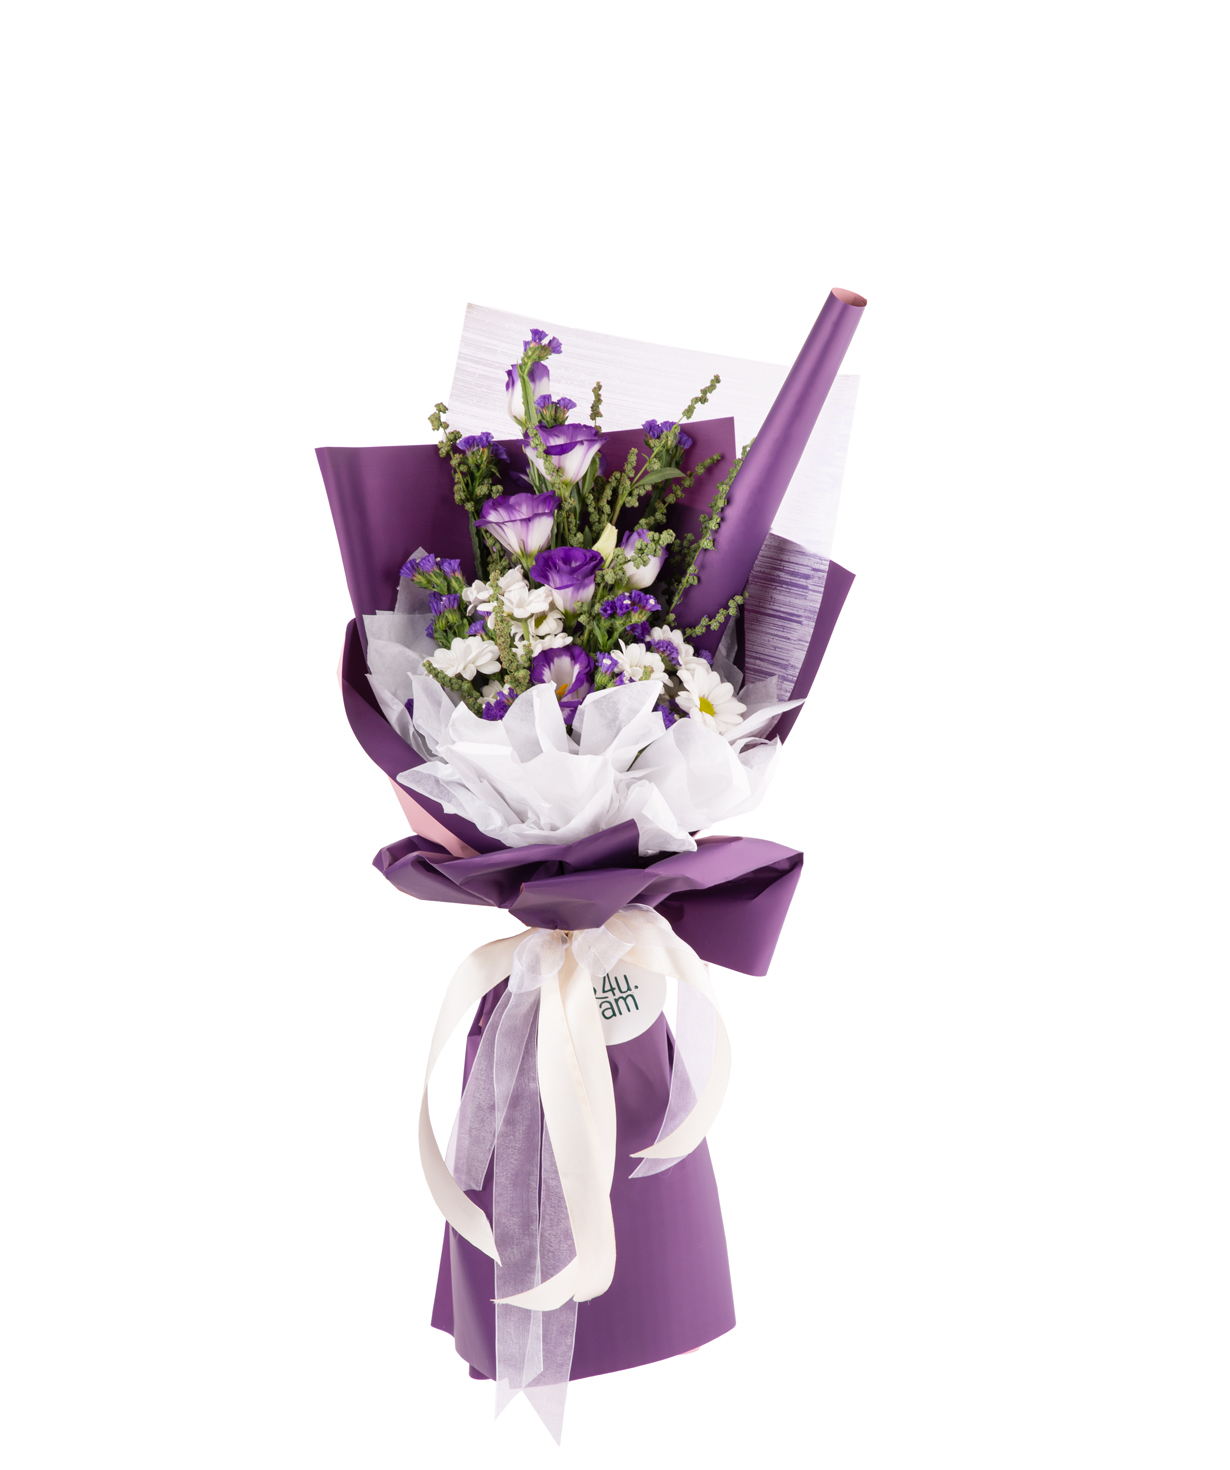 Bouquet `Exeter` with chrysanthemums, lisianthus, wildflowers